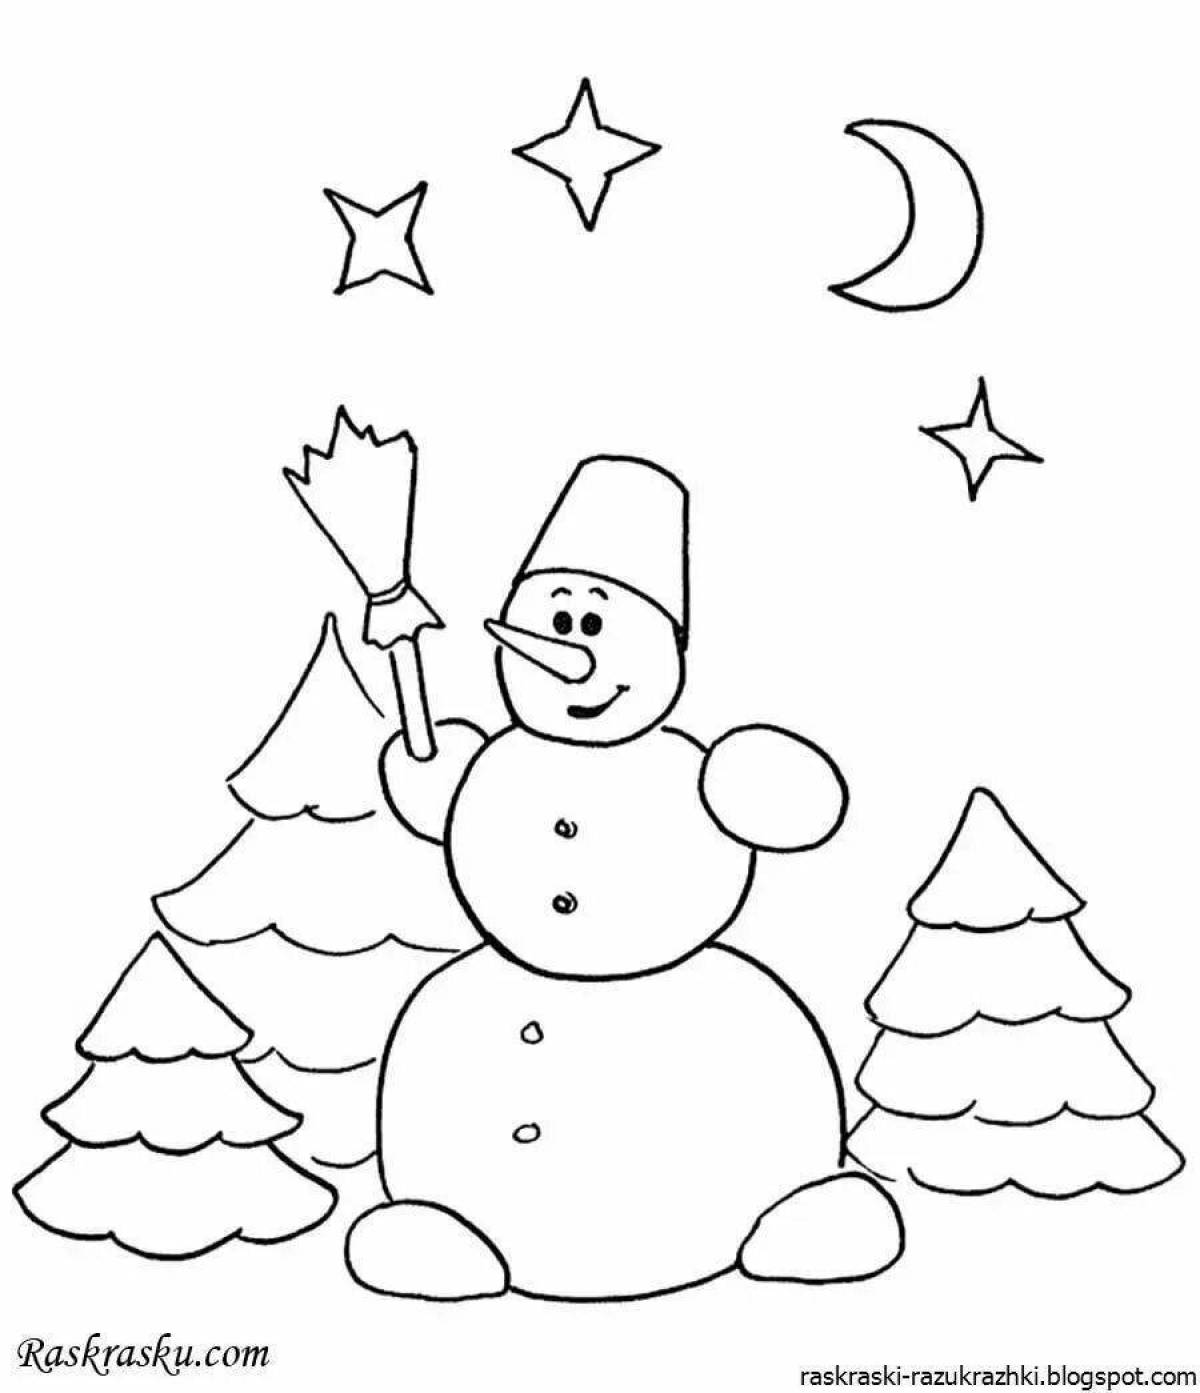 Bright snowman coloring card